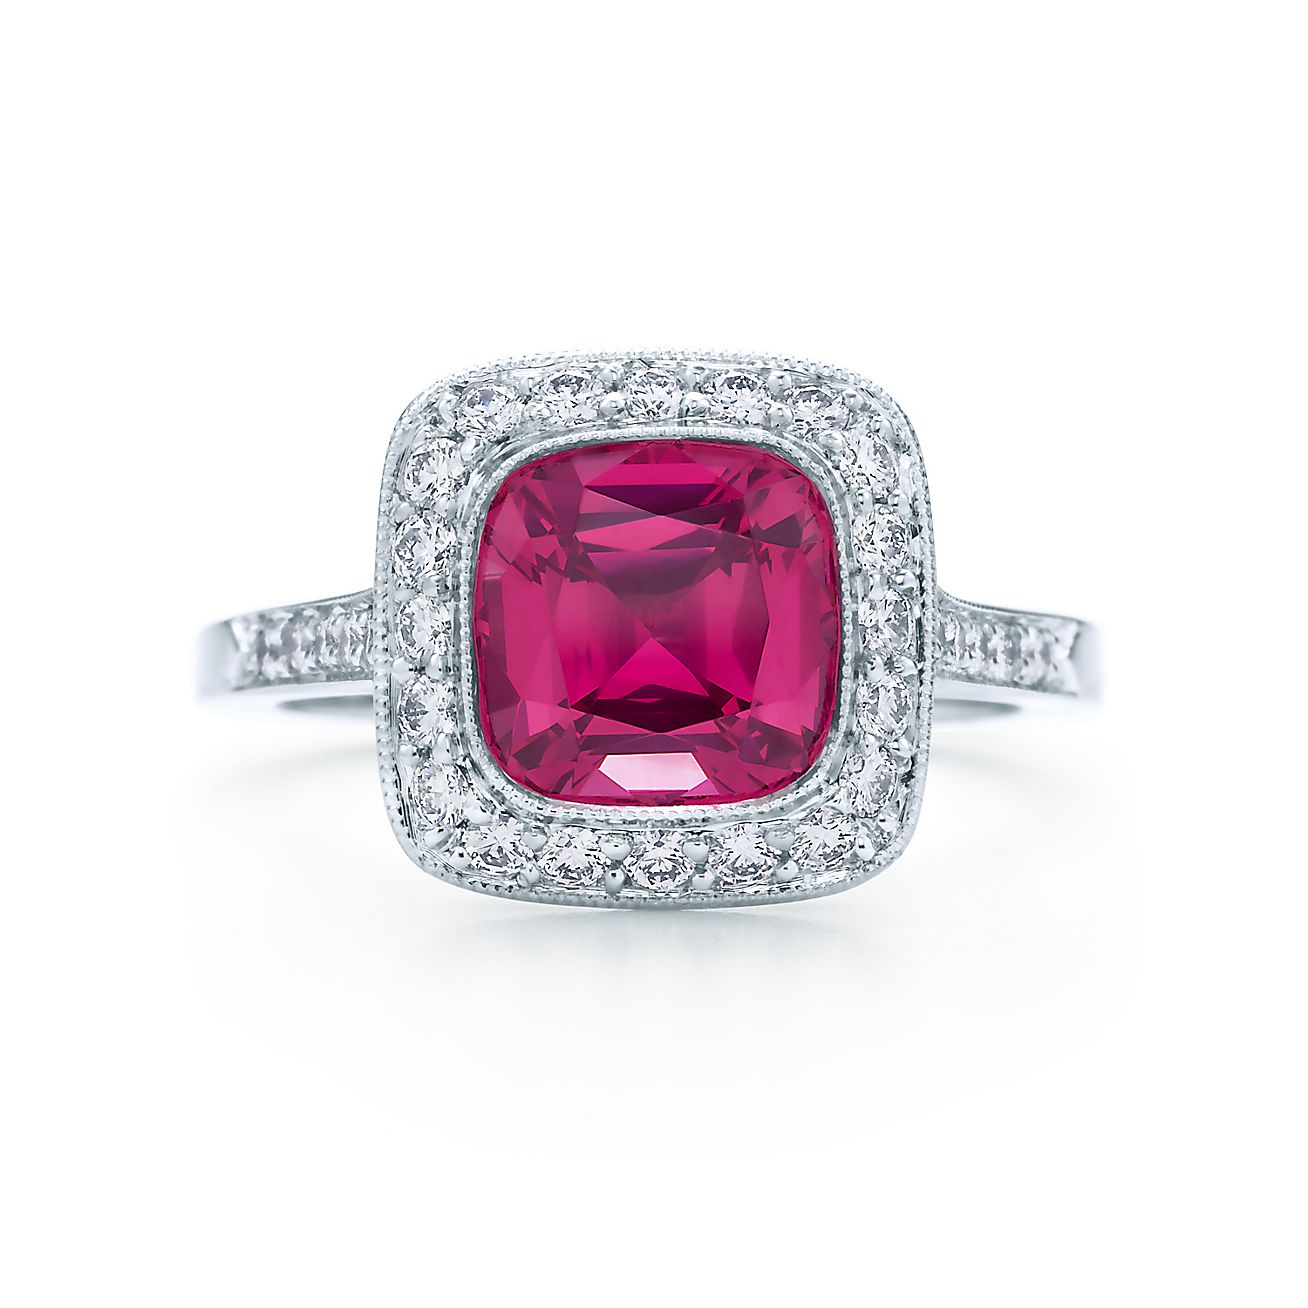 Tiffany Legacy® red spinel ring in platinum with diamonds. | Tiffany & Co.